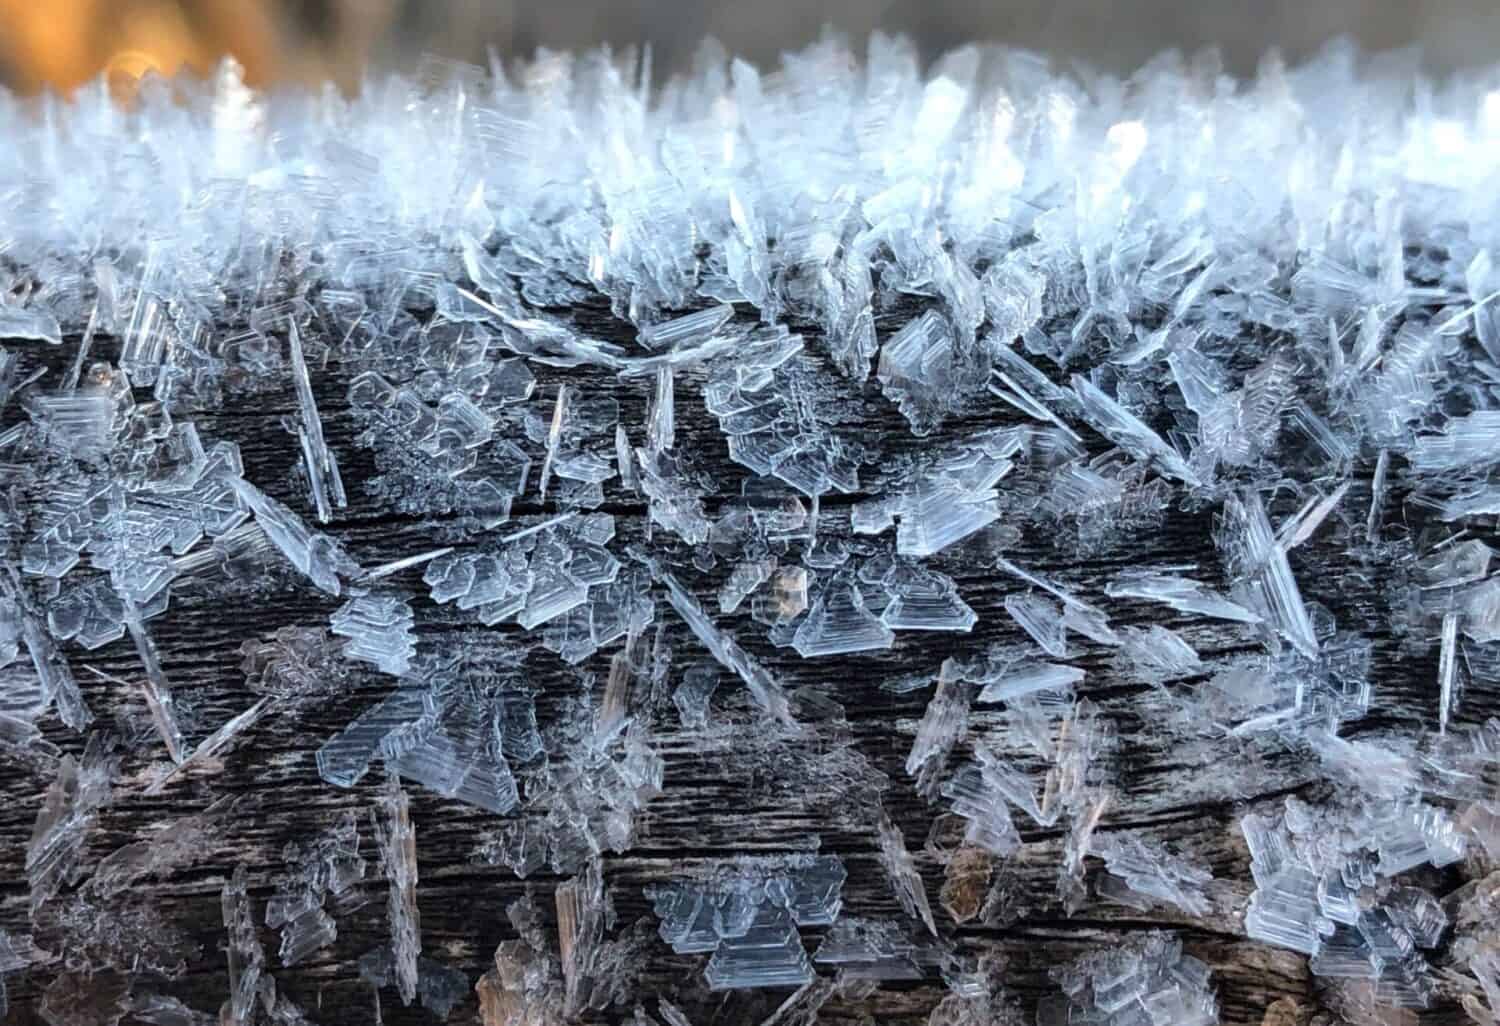 Ice crystals cover the surface of a log.